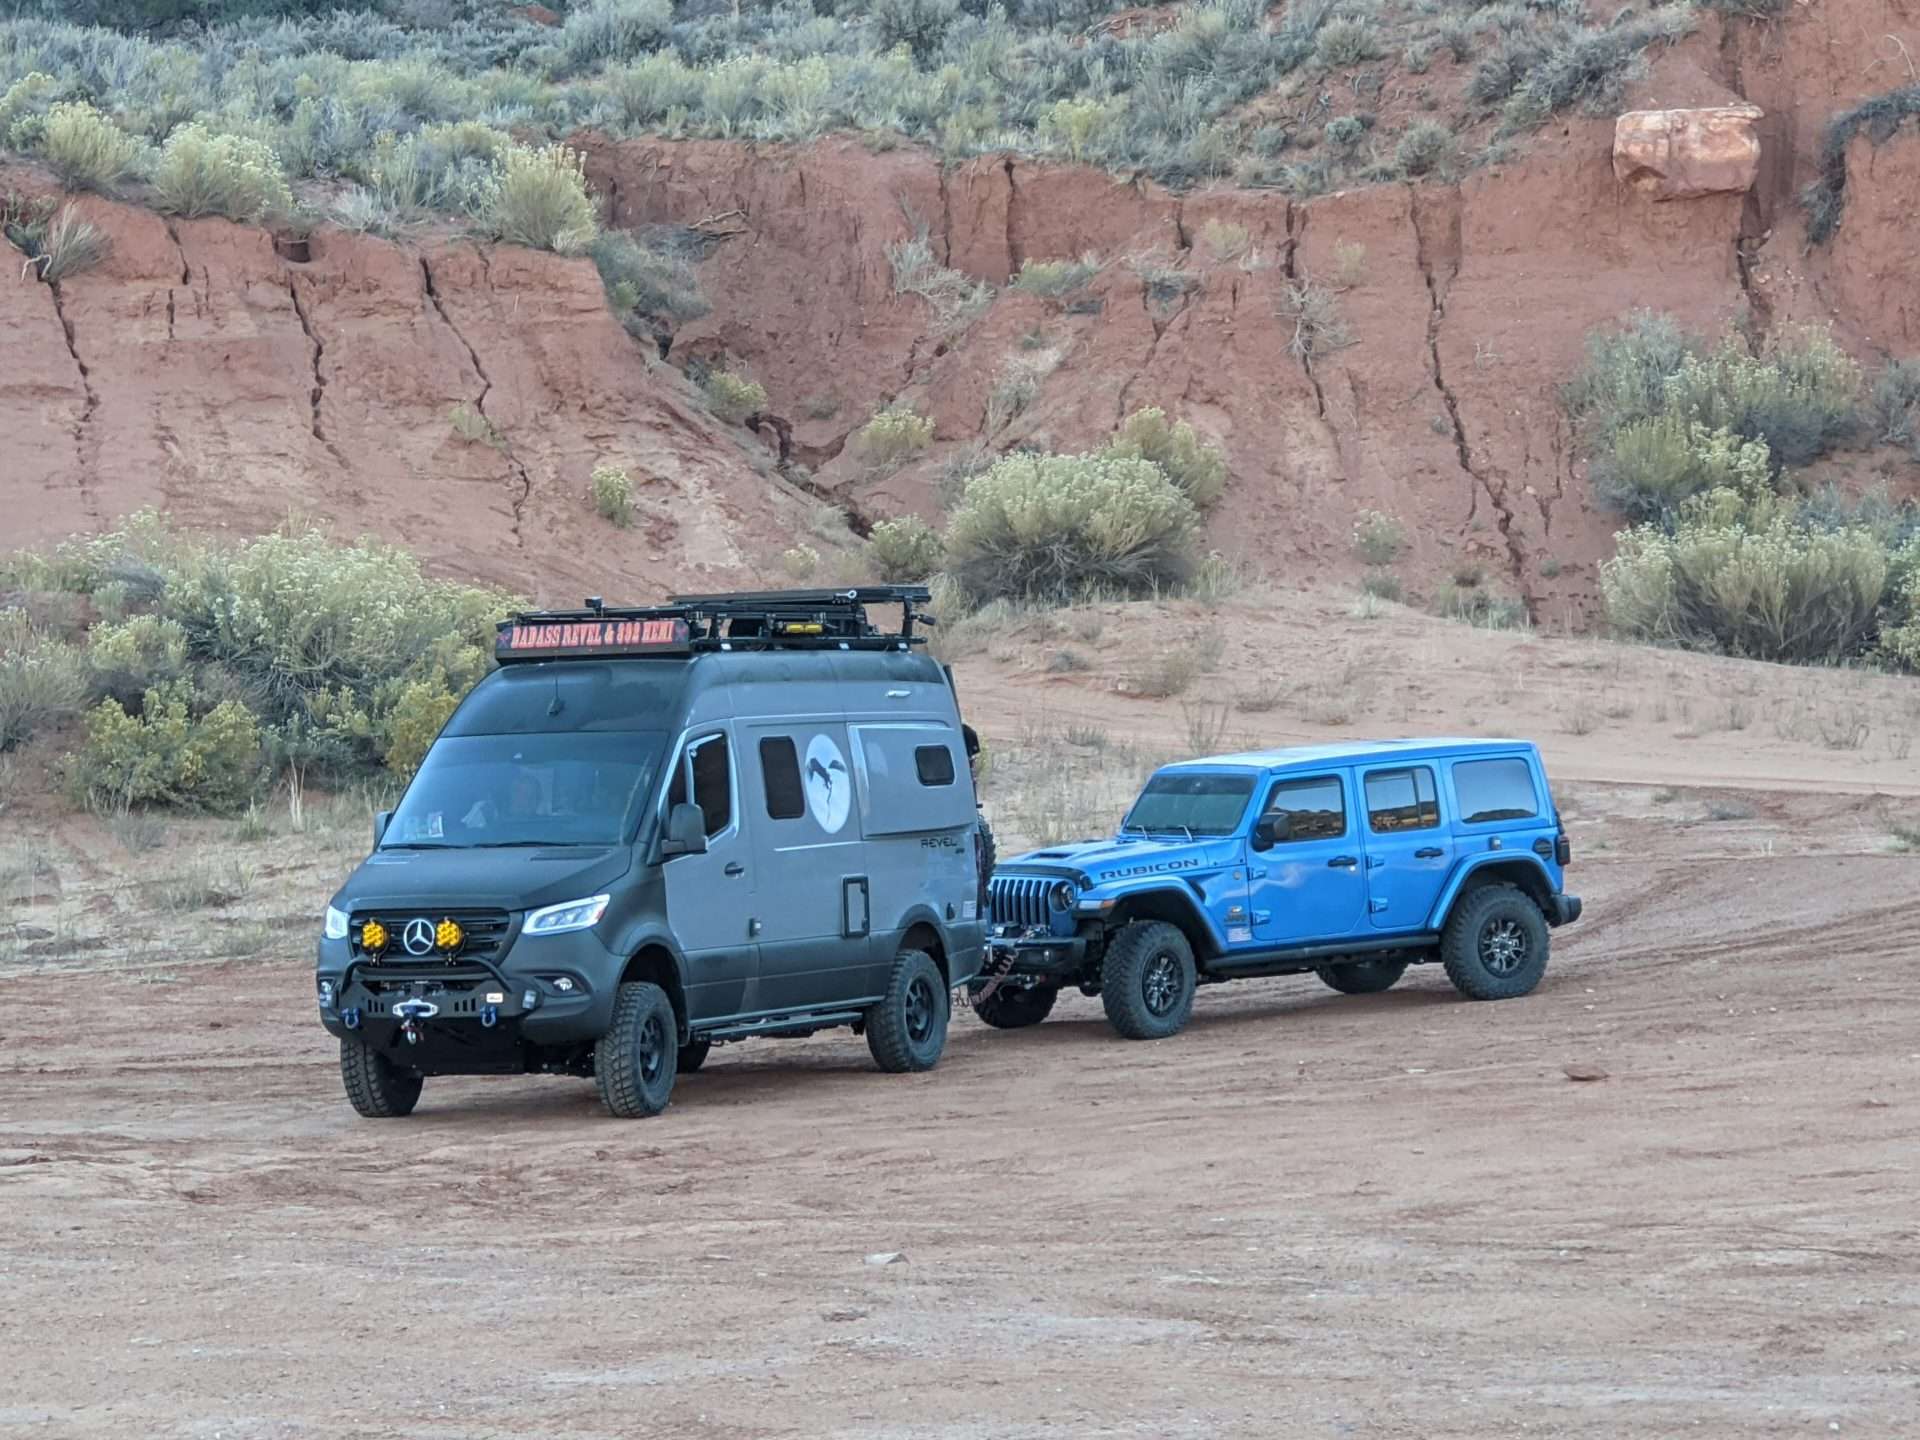 Winnebago Revel towing Jeep while off-roading